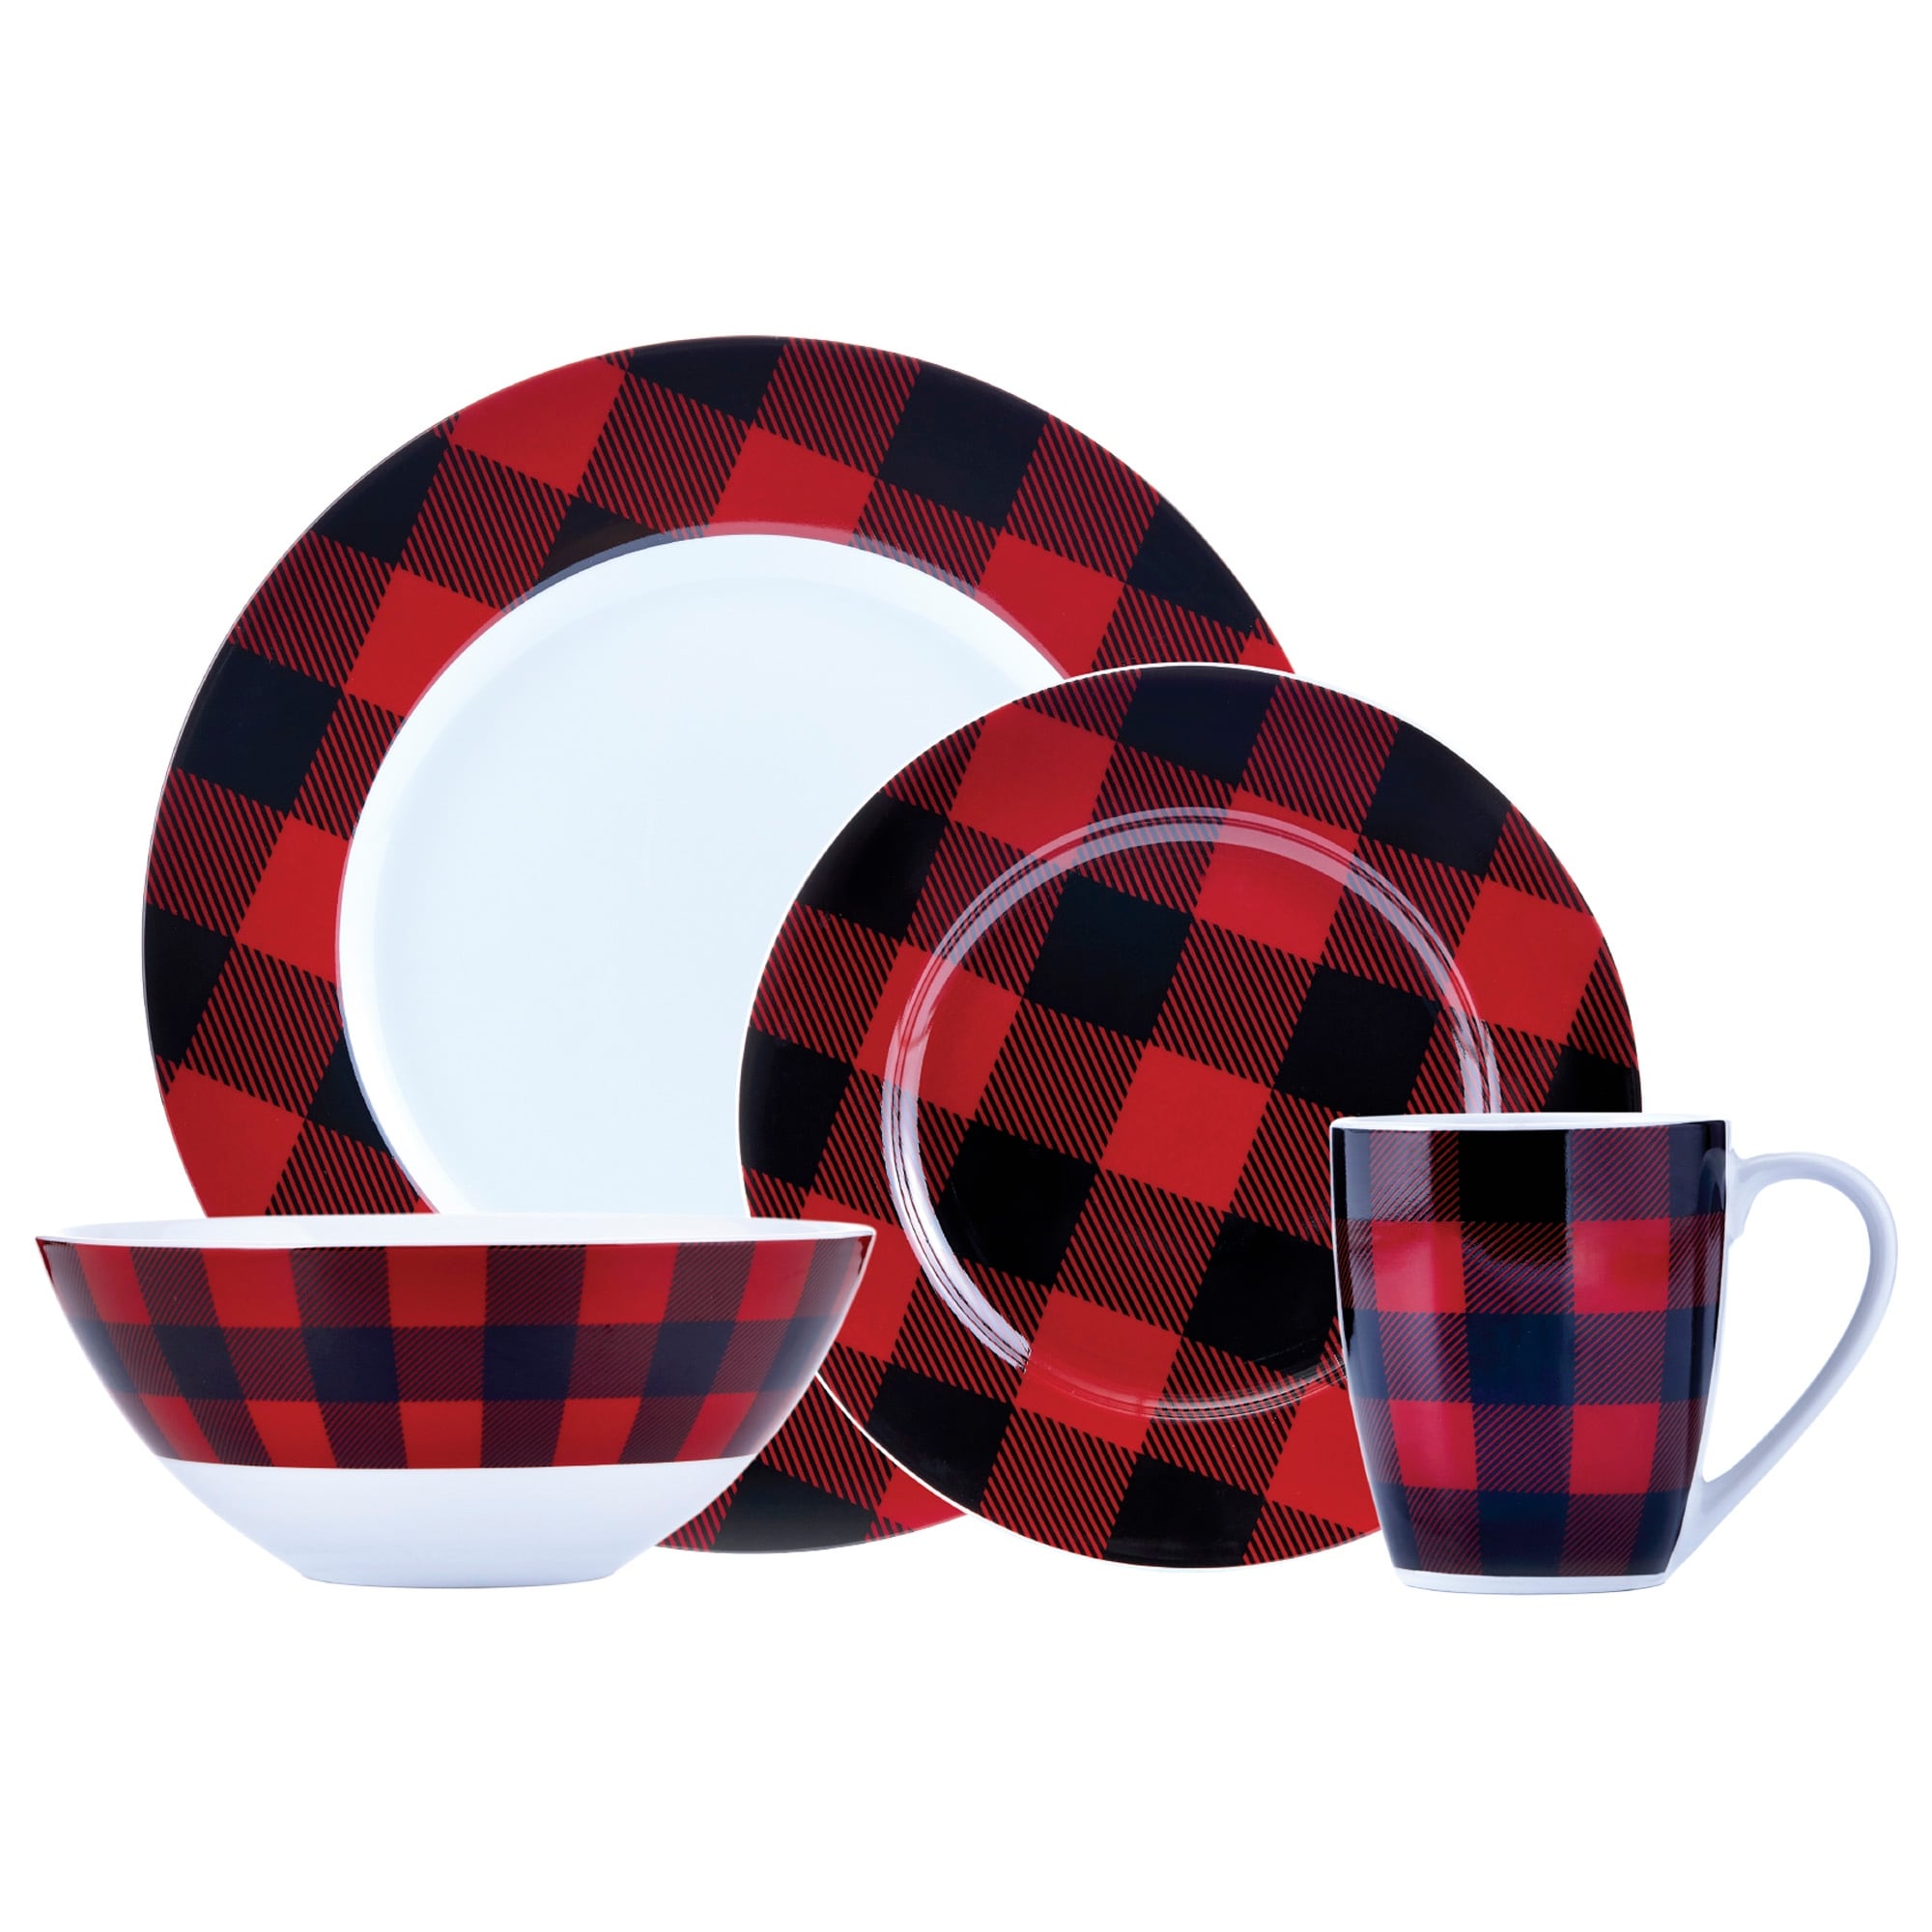 https://ak1.ostkcdn.com/images/products/is/images/direct/b940e90cd583f07f72a1d5a0a6b392fc519b05d7/Dinnerset-16PC-Buffalo-Plaid-Red-Black.jpg